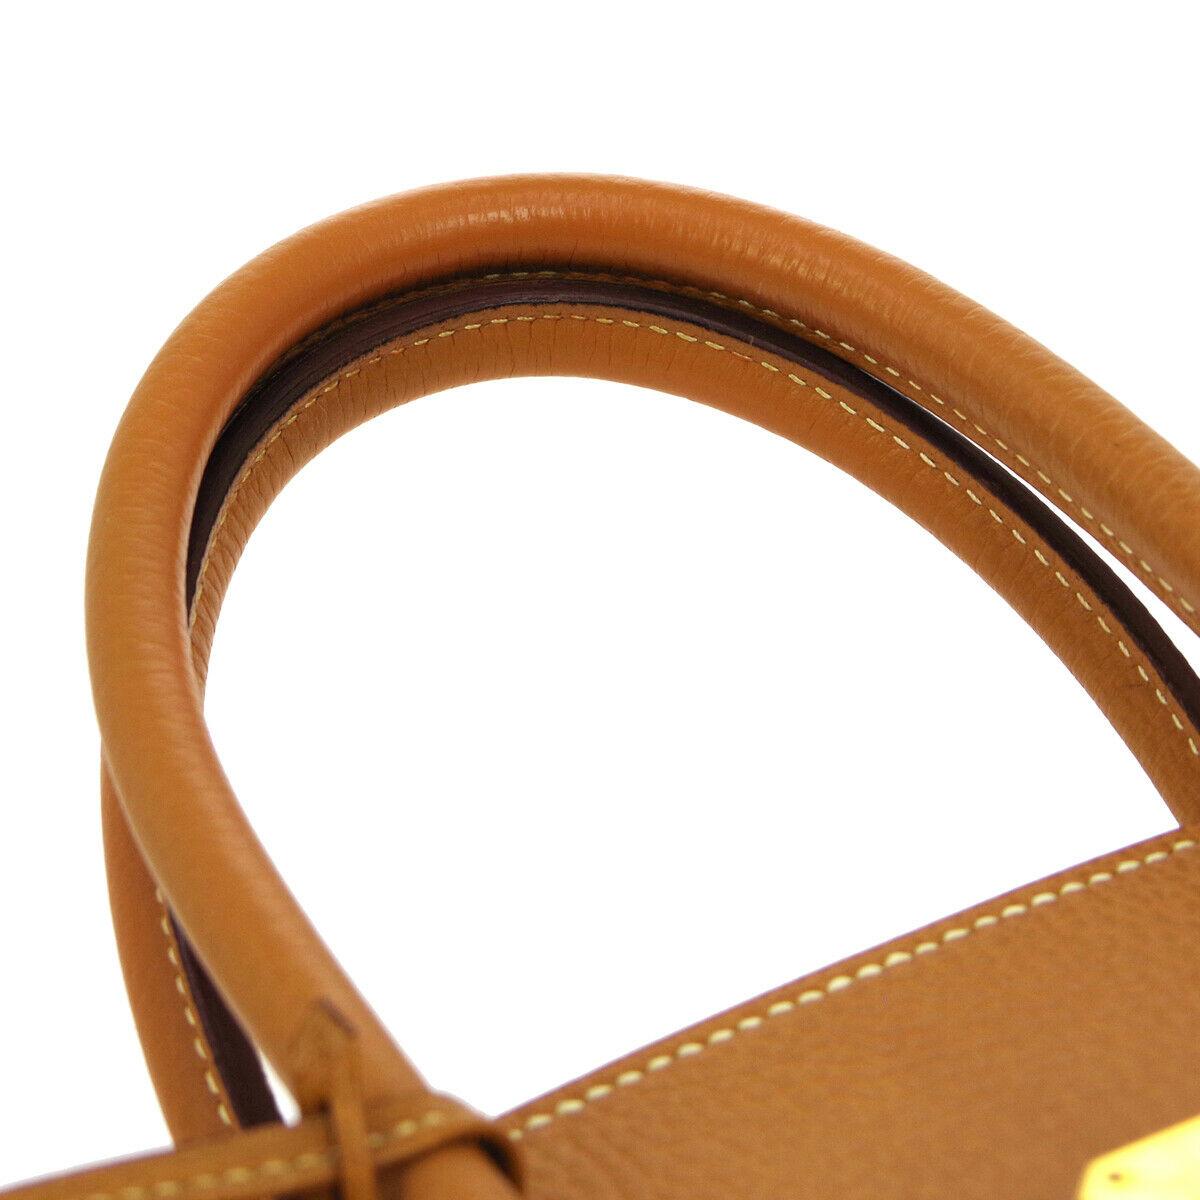 Hermes Birkin 35 Cognac Leather Gold Top Handle Satchel Travel Tote Bag

Leather
Gold tone hardware
Leather lining
Date code present
Made in France
Handle drop 4